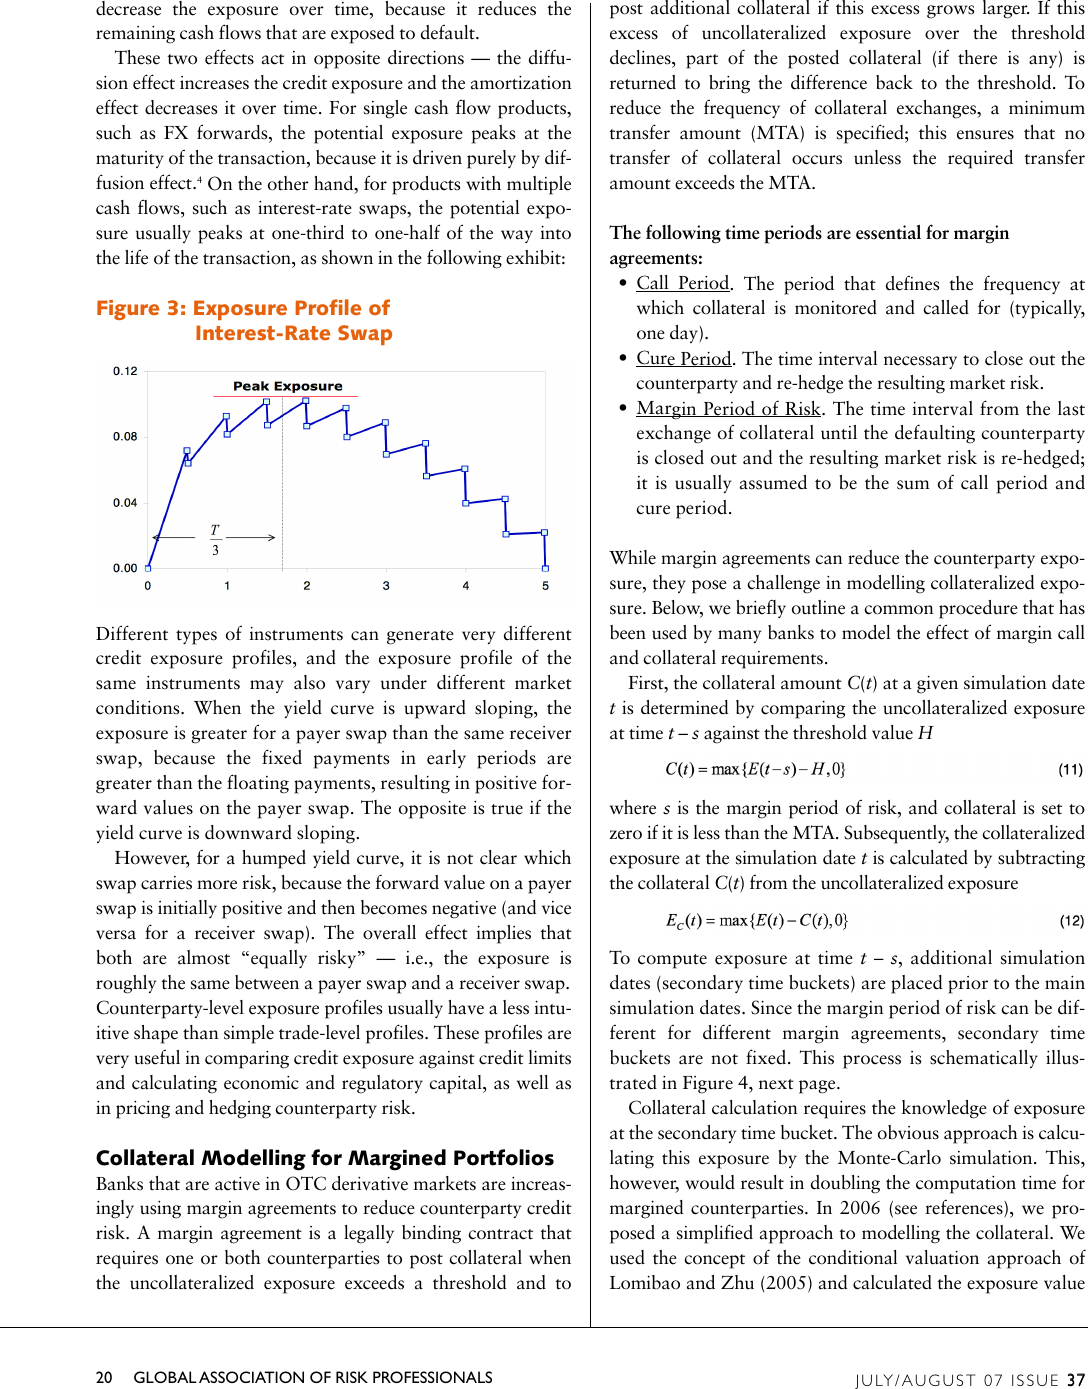 Page 5 of 7 - 16_CoverStory_ Pykhtin, Zhu - 2007 A Guide To Ling Counterparty Credit Risk